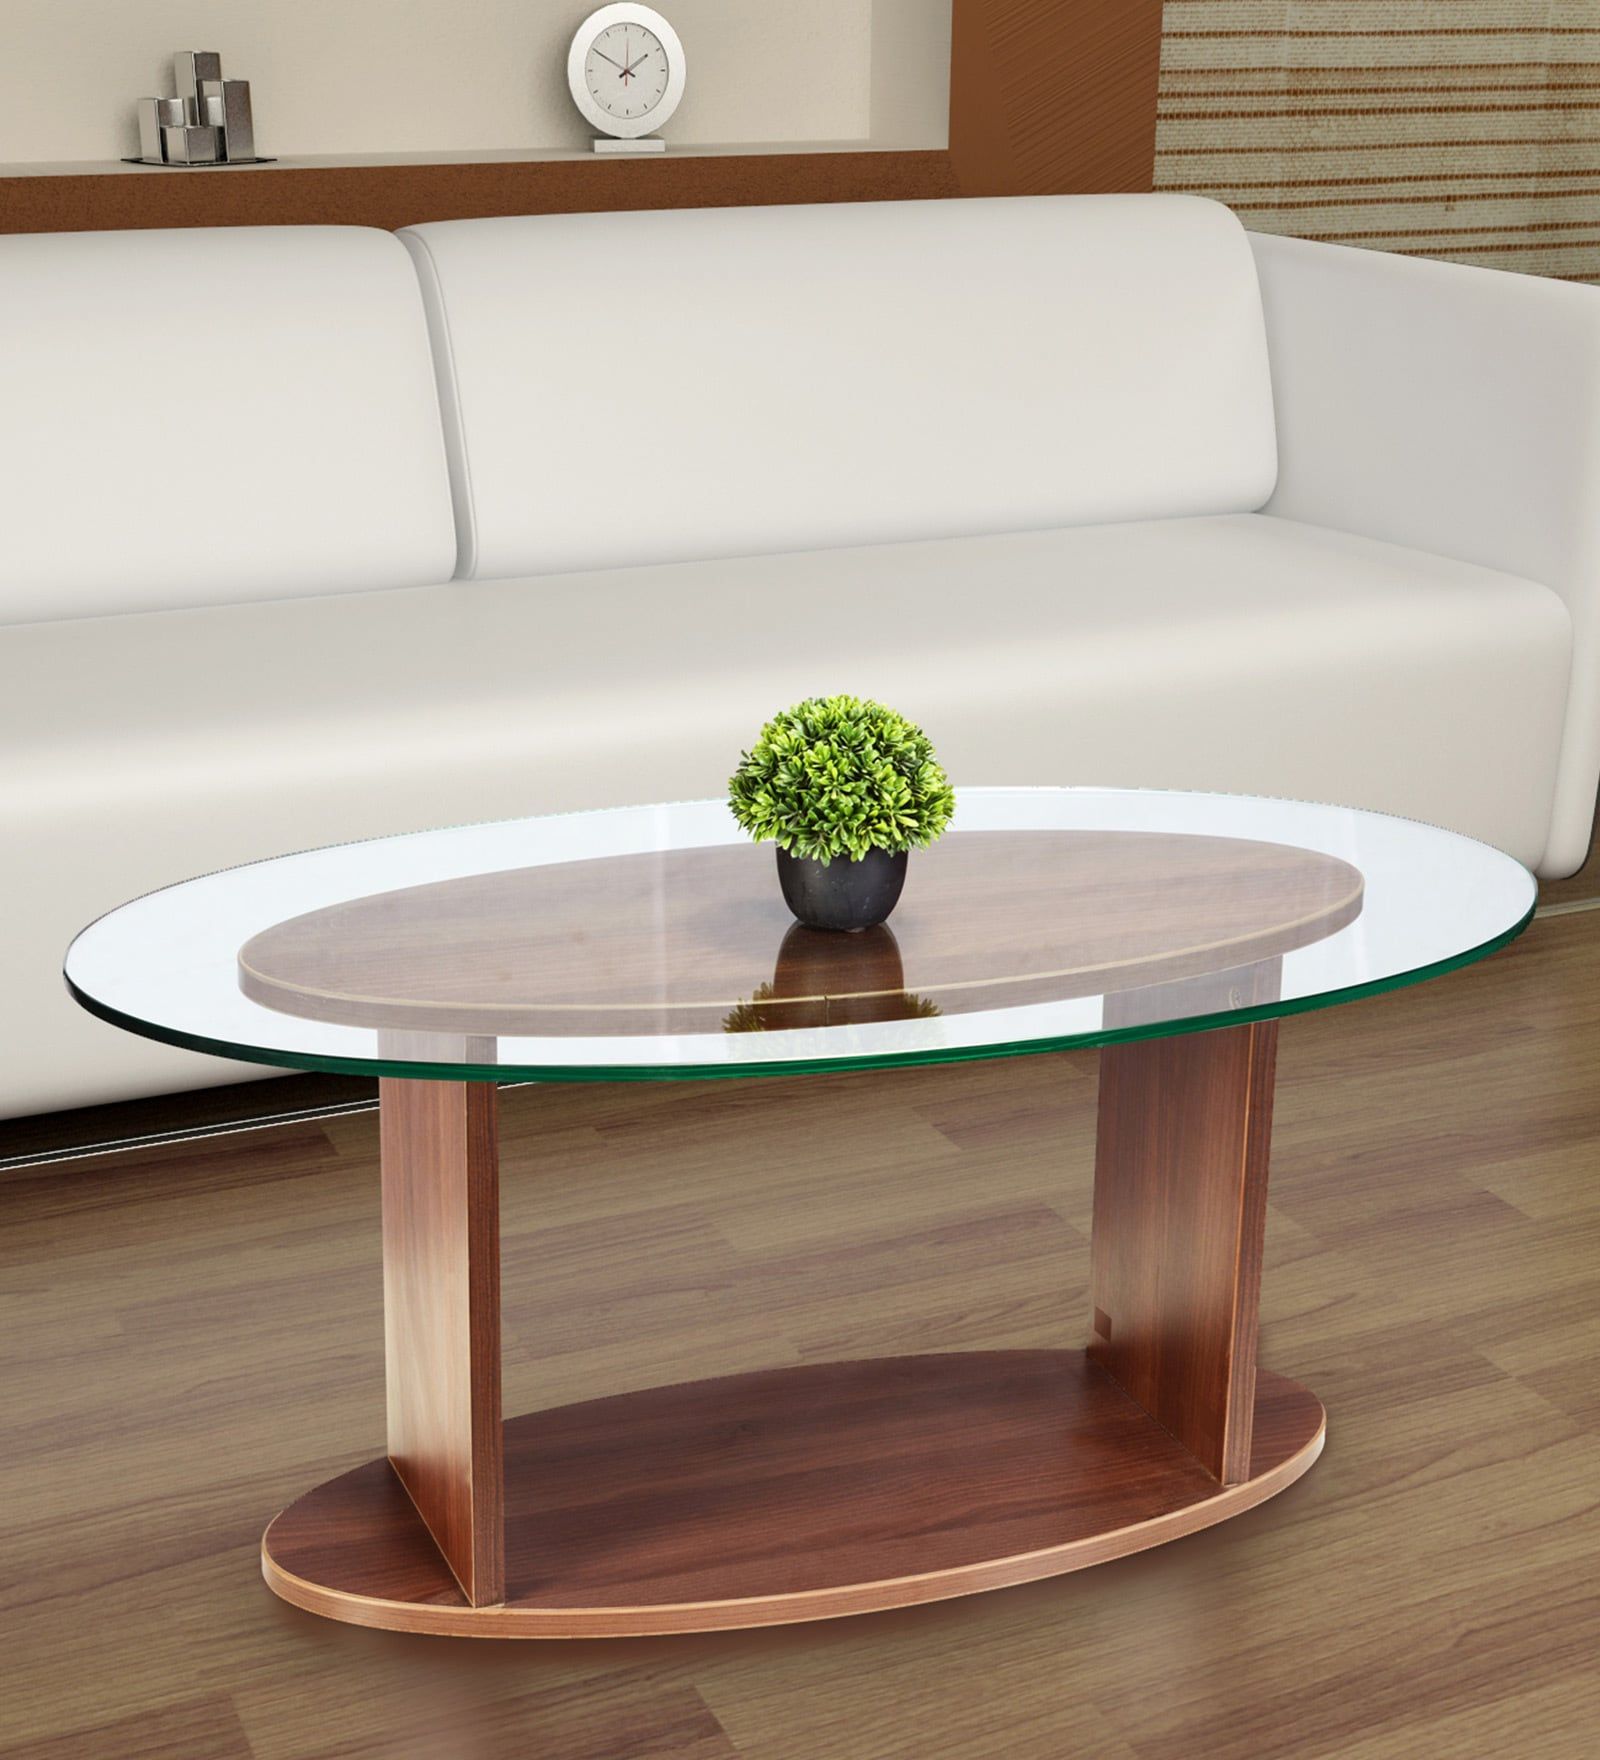 Buy Oval Shaped Glass Top Coffee Table In Walnut Finishaddy Design Regarding Wood Tempered Glass Top Coffee Tables (View 10 of 20)